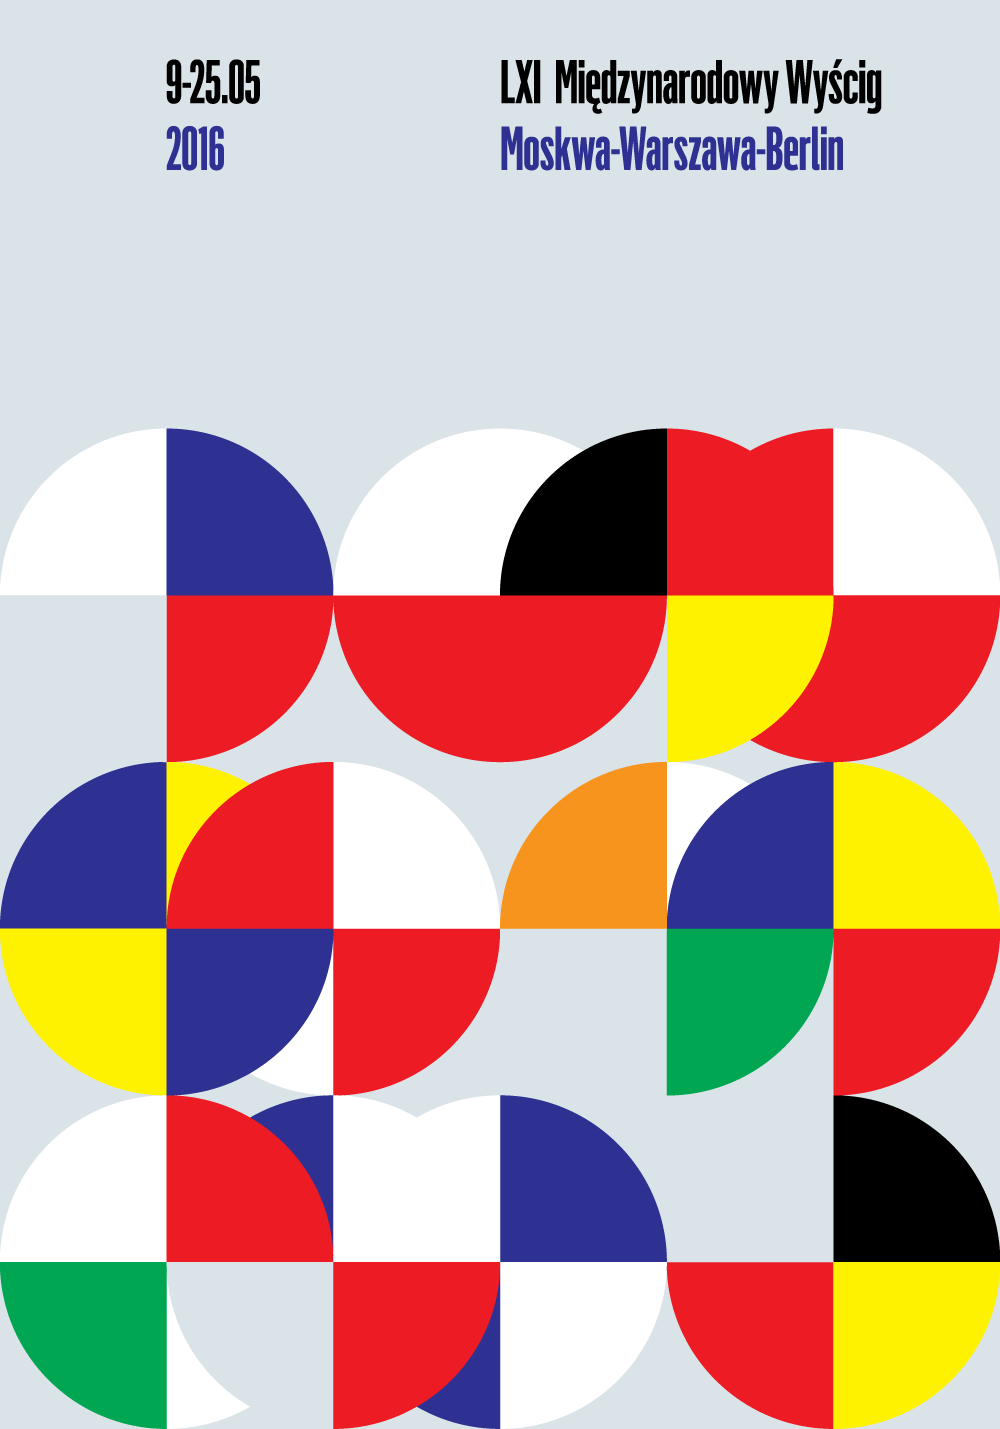 A poster showing geometric shapes in the colours of national flags of Europe